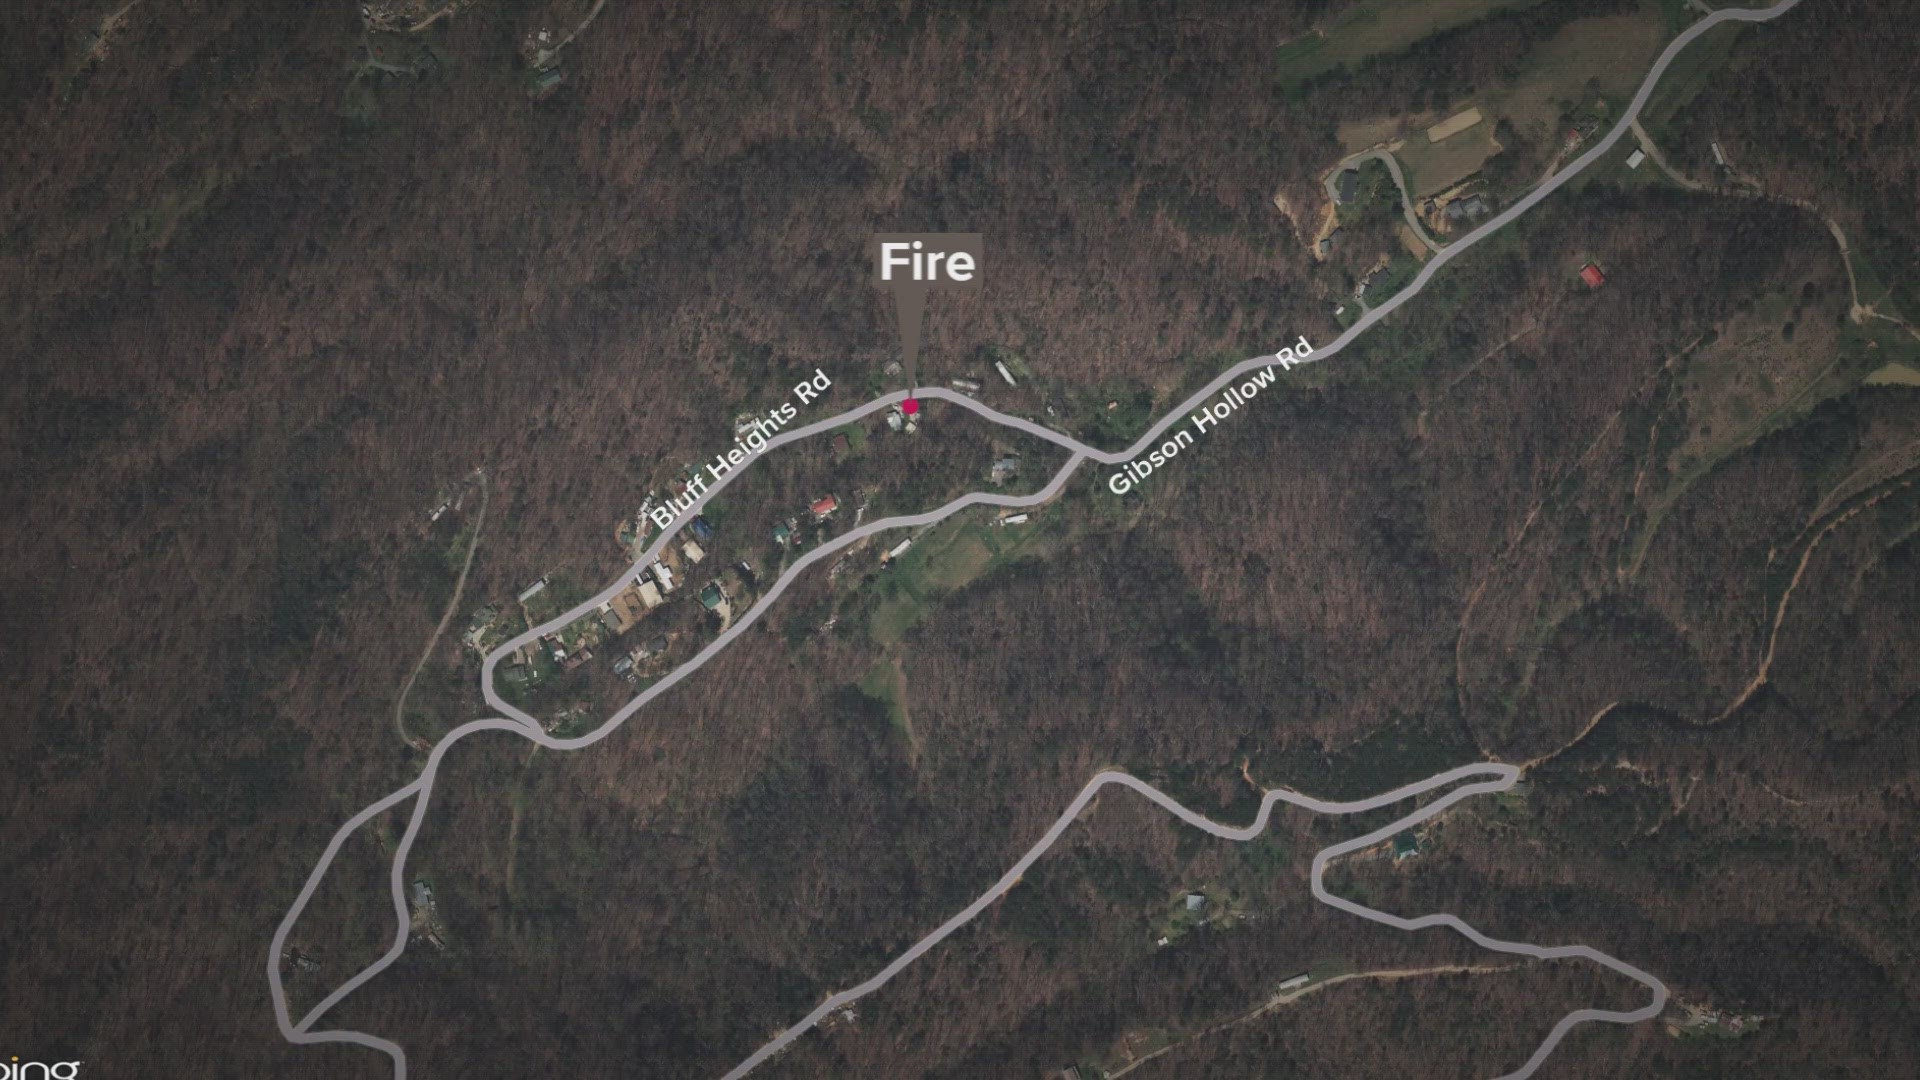 The fire was reported on Bluff Heights Road Tuesday evening. One structure was impacted by the fire.